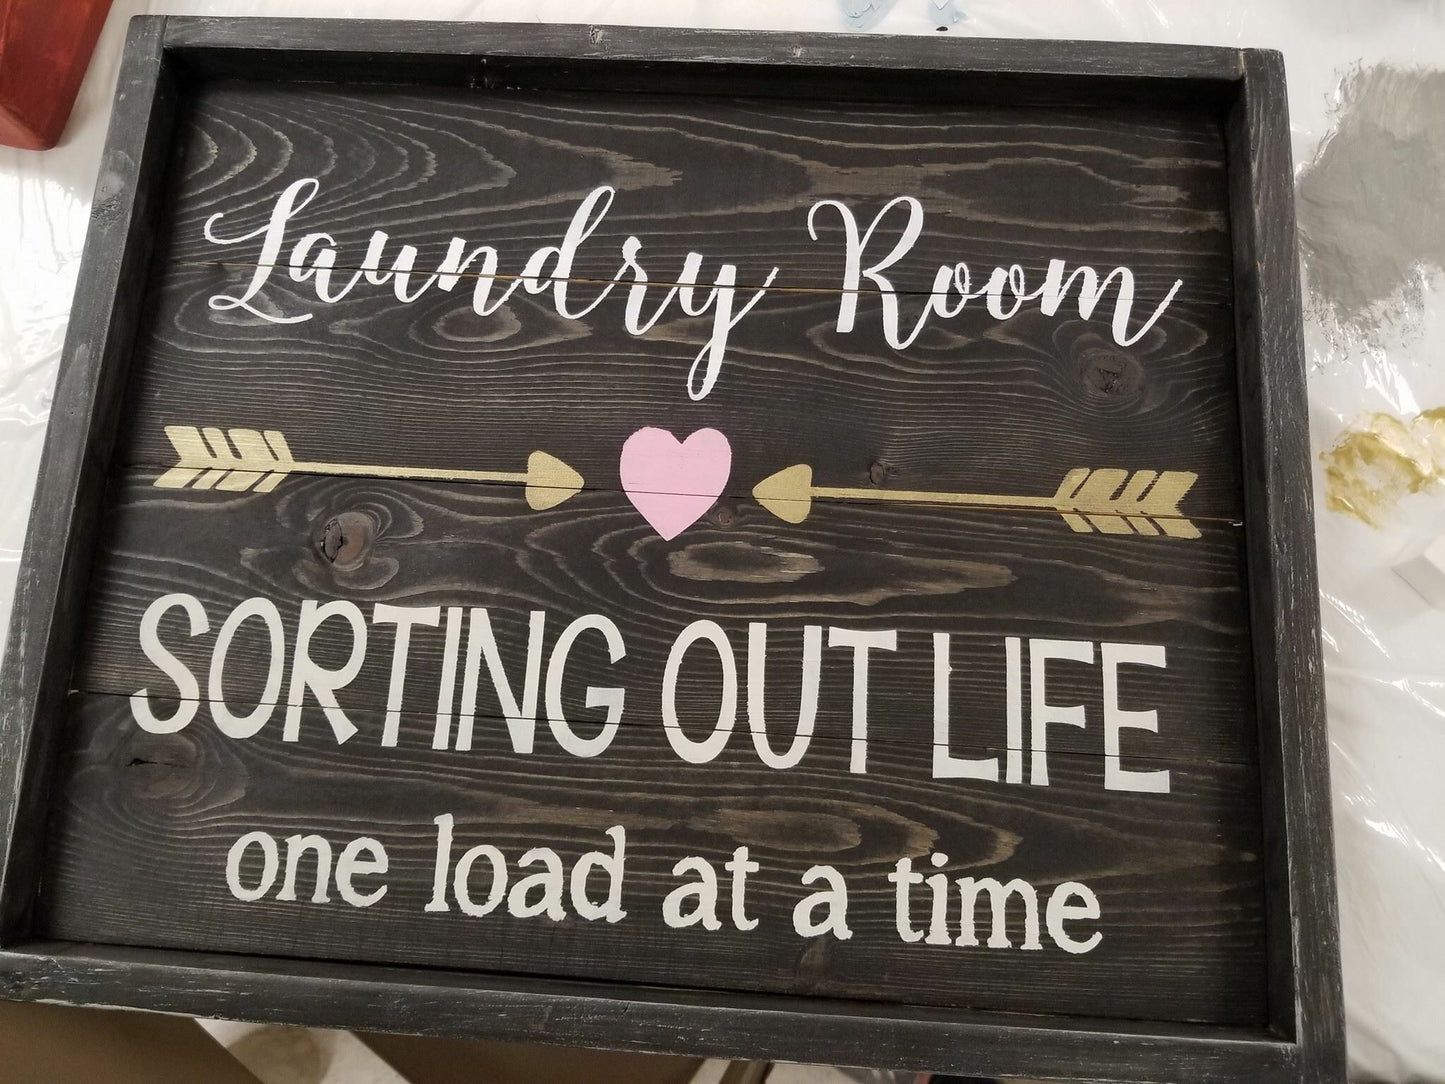 Laundry room sorting out life one load at a time with arrows